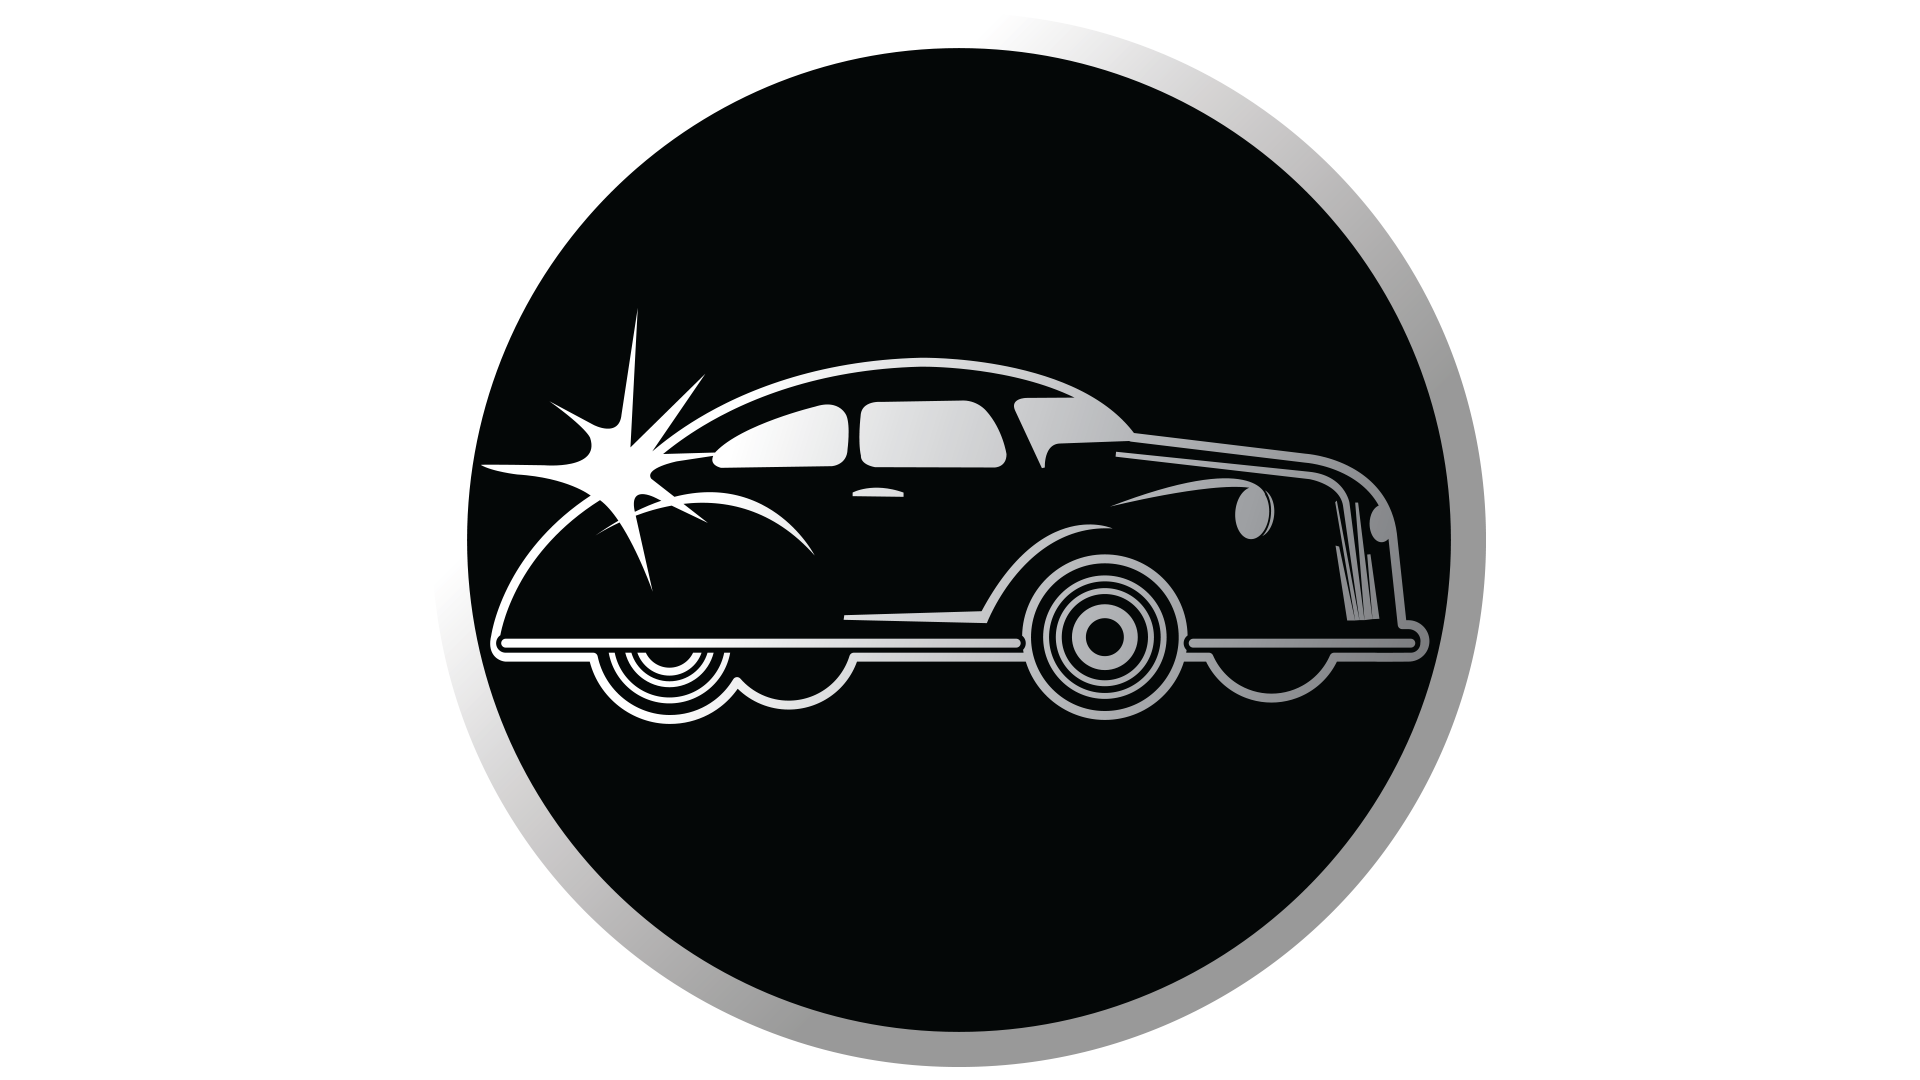 Icon for Chauffeur Service